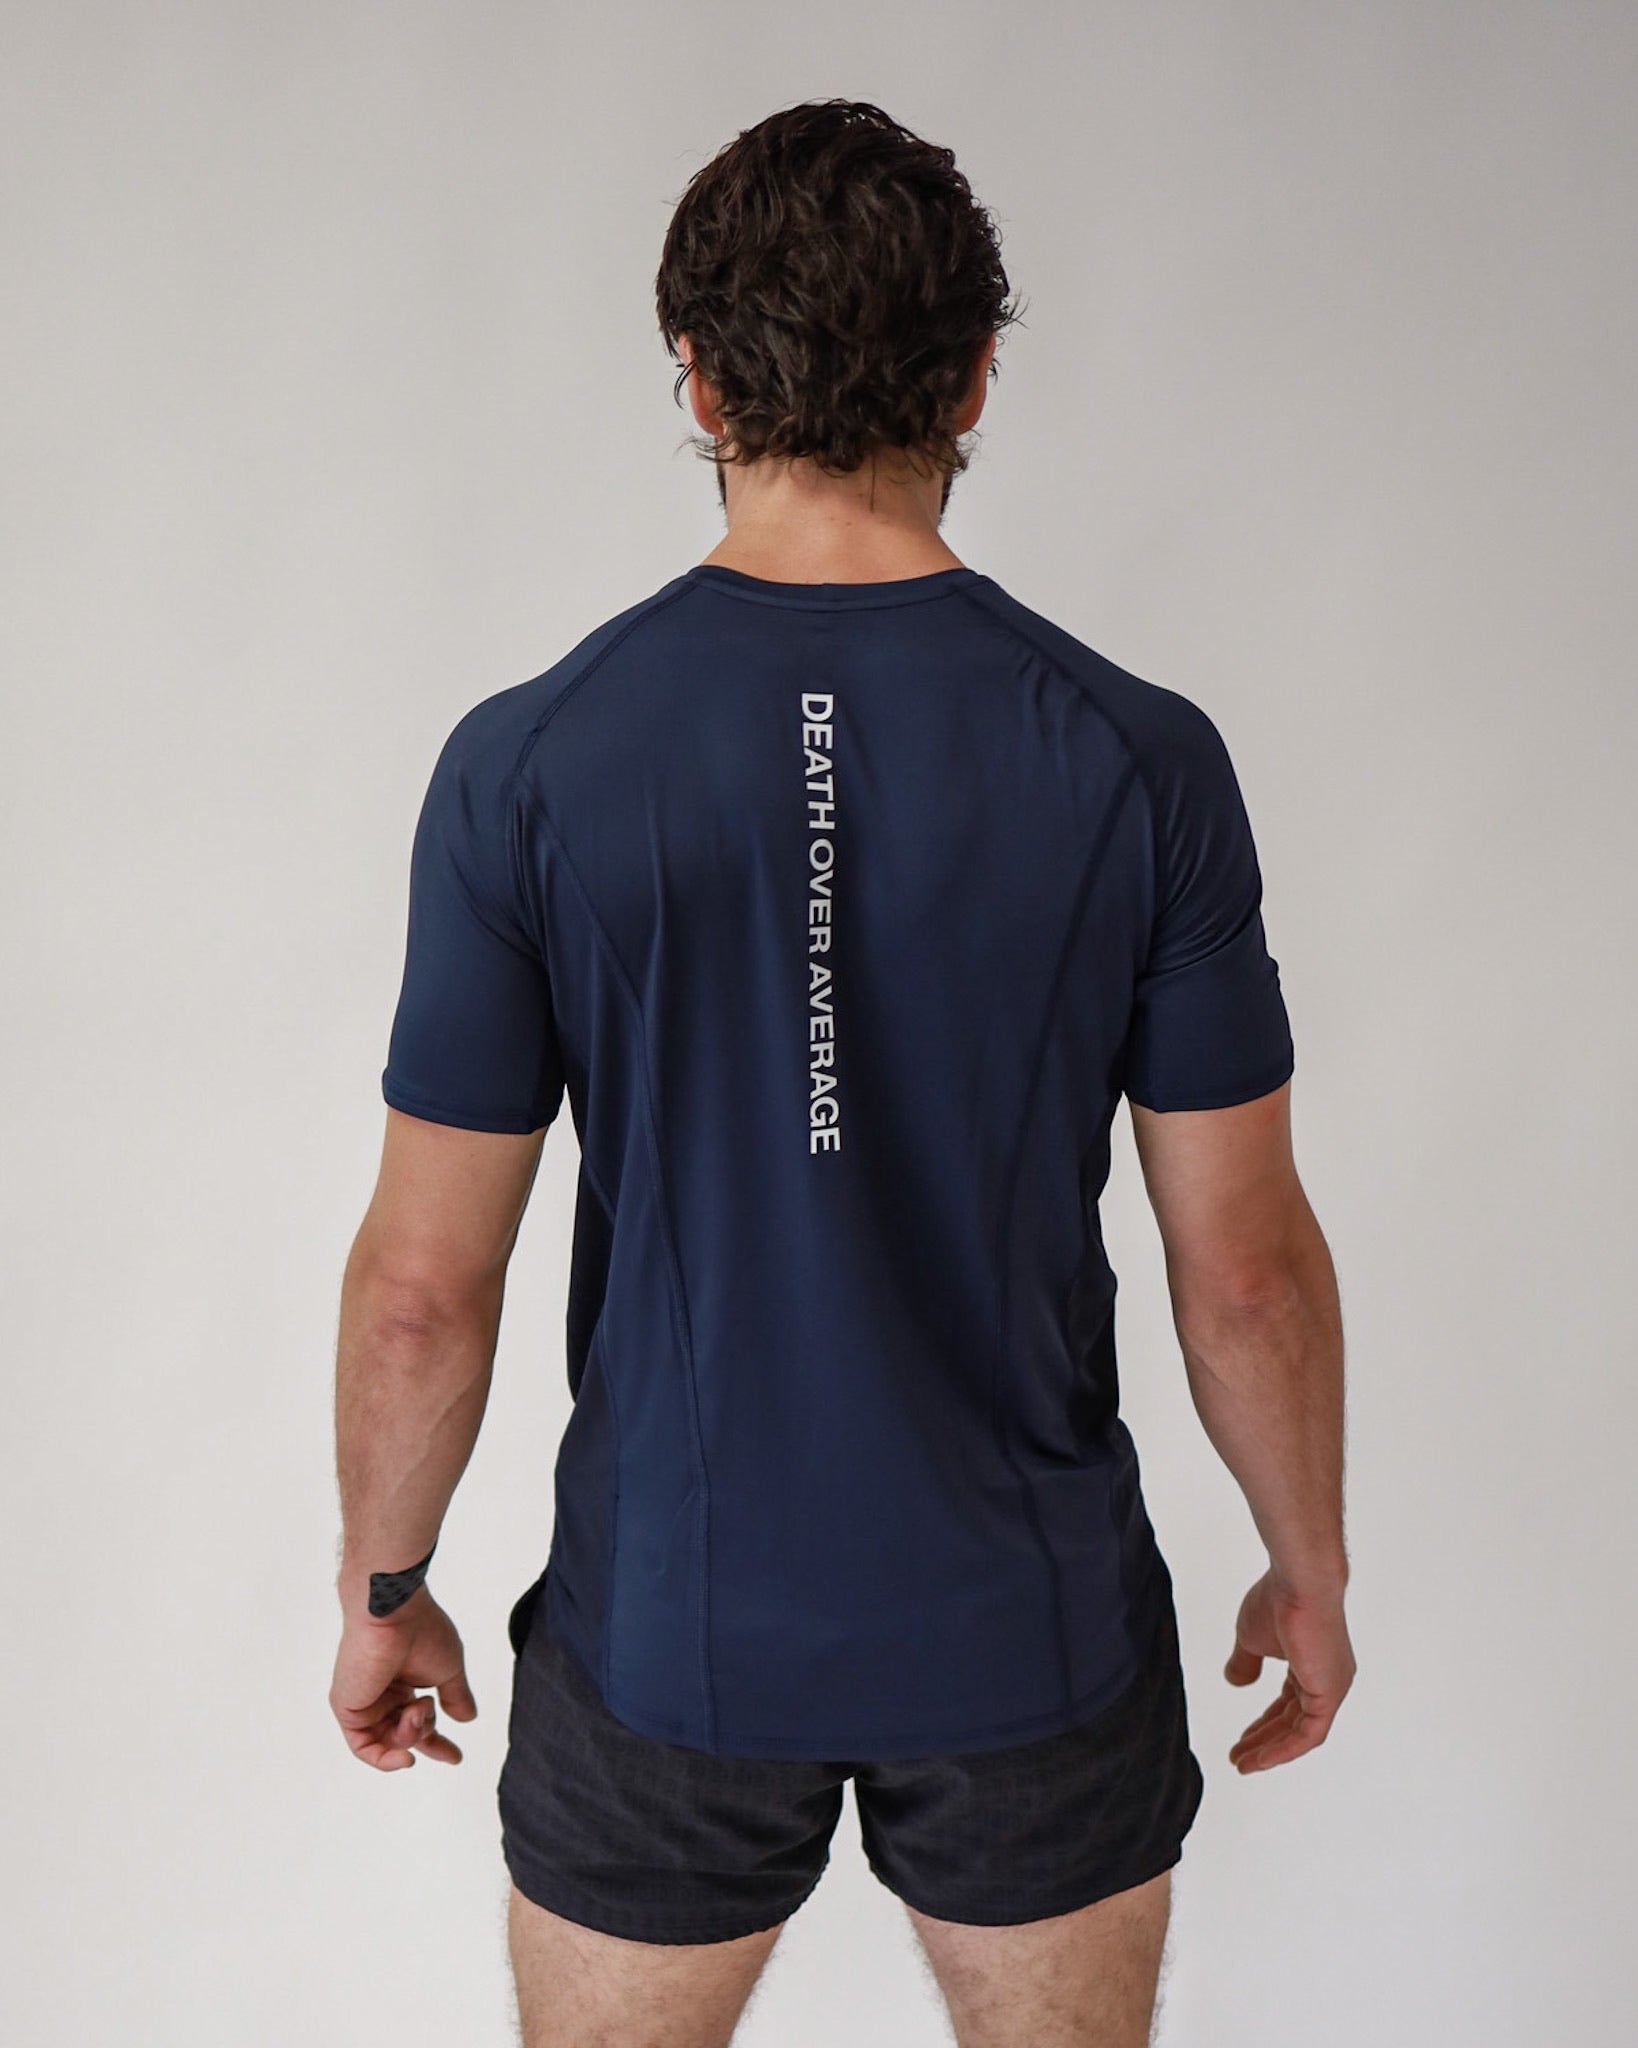 Pro-Tech V1 Athletic Fitted Short Sleeve Tee - Navy